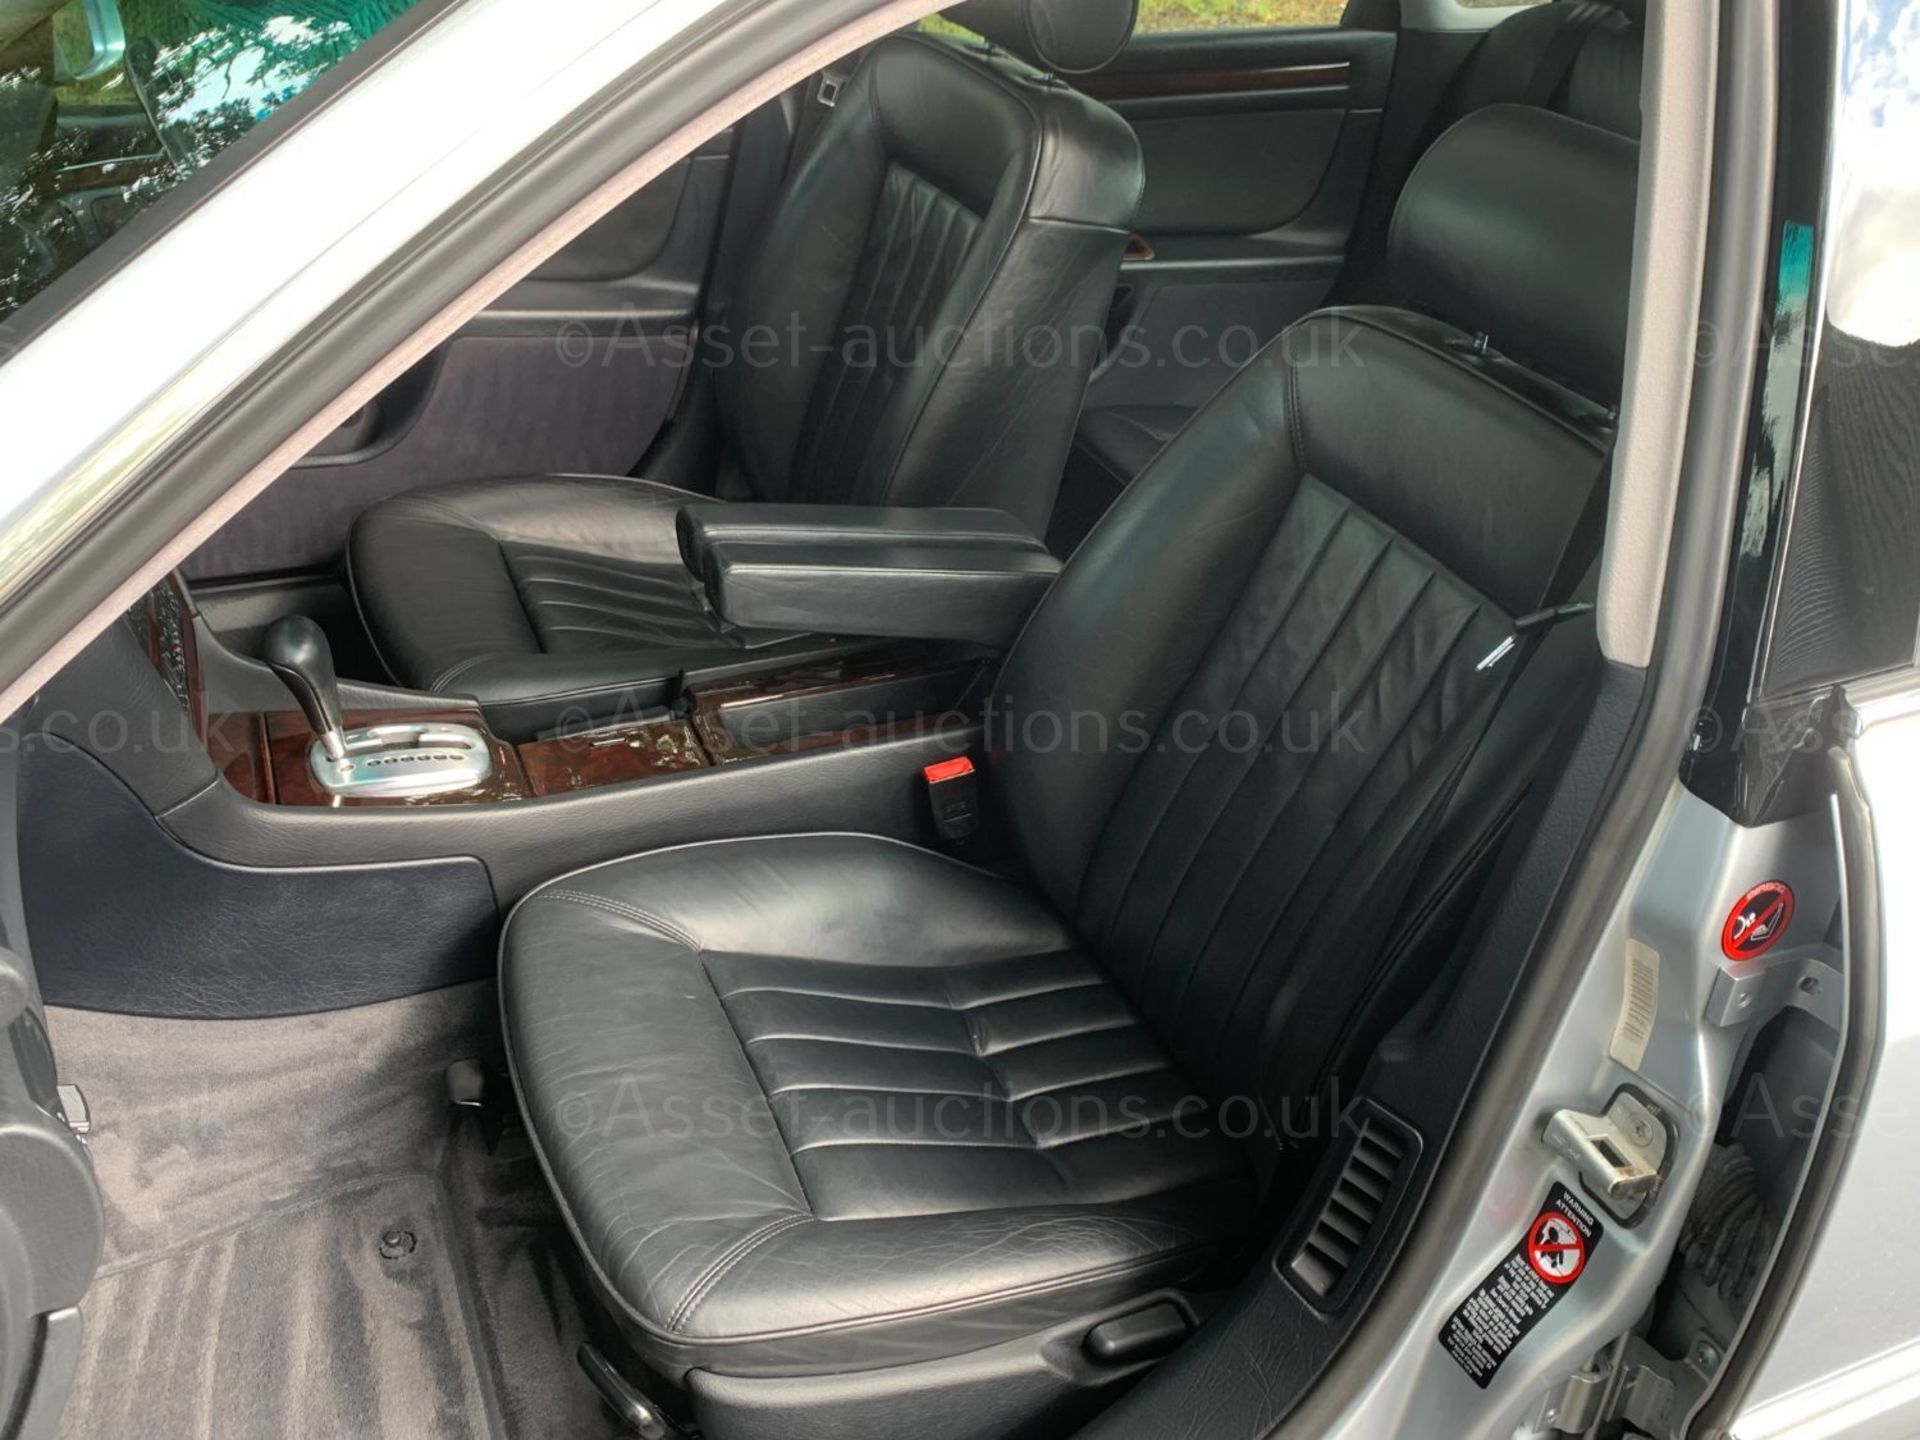 1997 AUDI A8 2.8 AUTO, GENUINE 63K MILES FROM NEW AUMINIUM SILVER, DARK BLUE LEATHER INTERIOR - Image 5 of 10